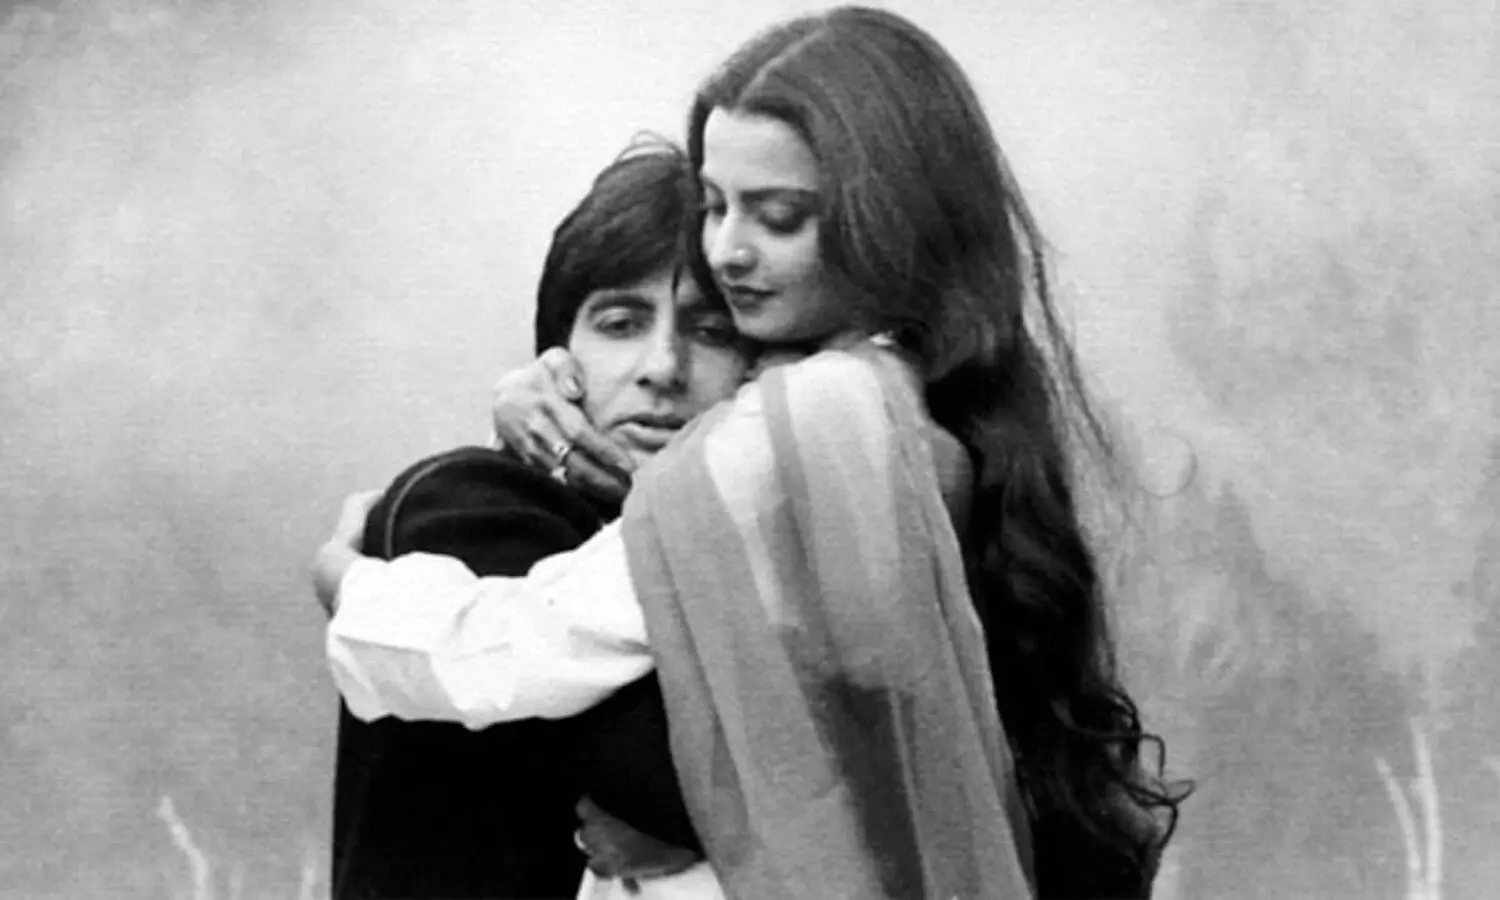 Love Tale: When Rekha was asked, Did you love Amitabh Bachchan? Heres what she said